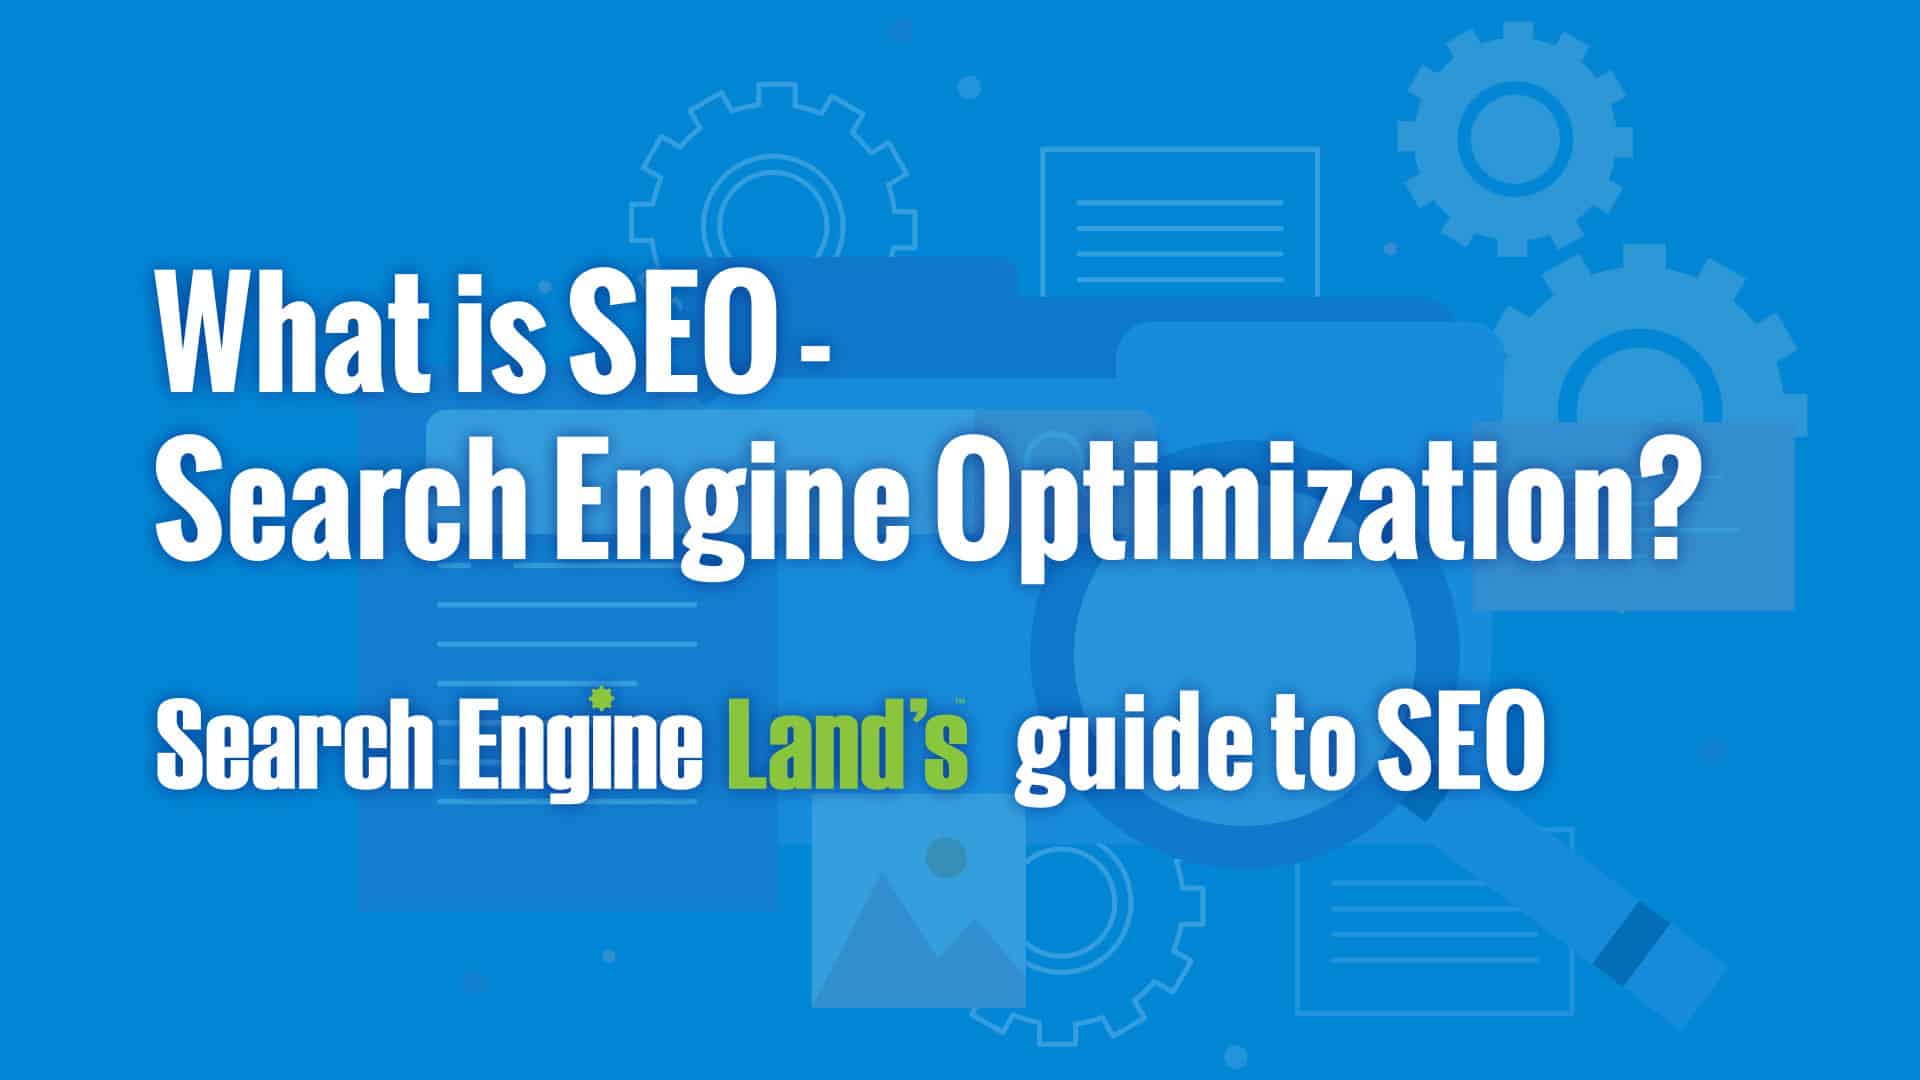 Read About Why Search Engine Optimization Is Easier Than You Think!